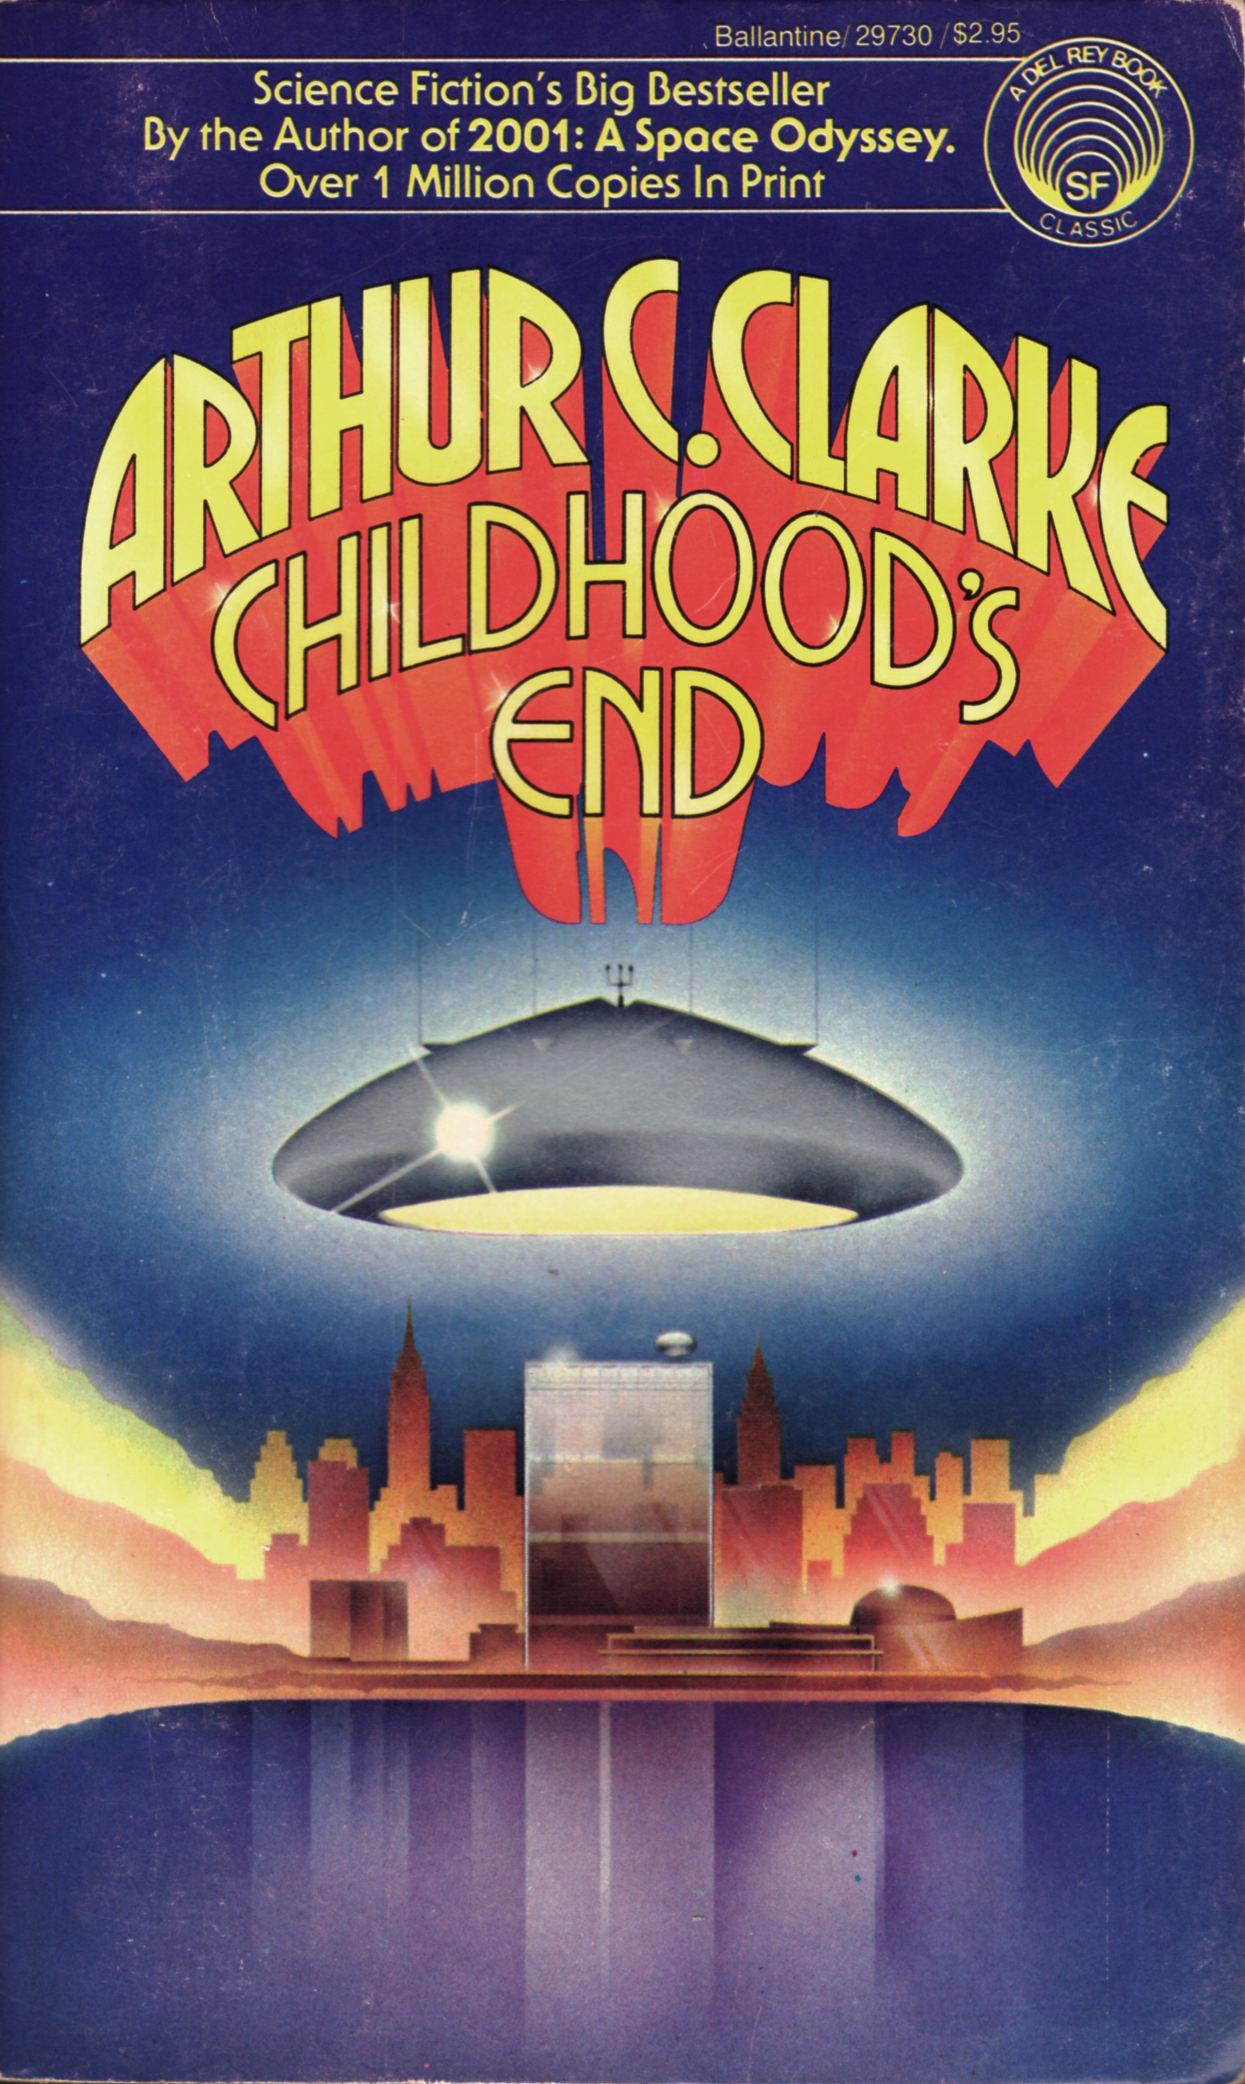 childhood's end sci fi book